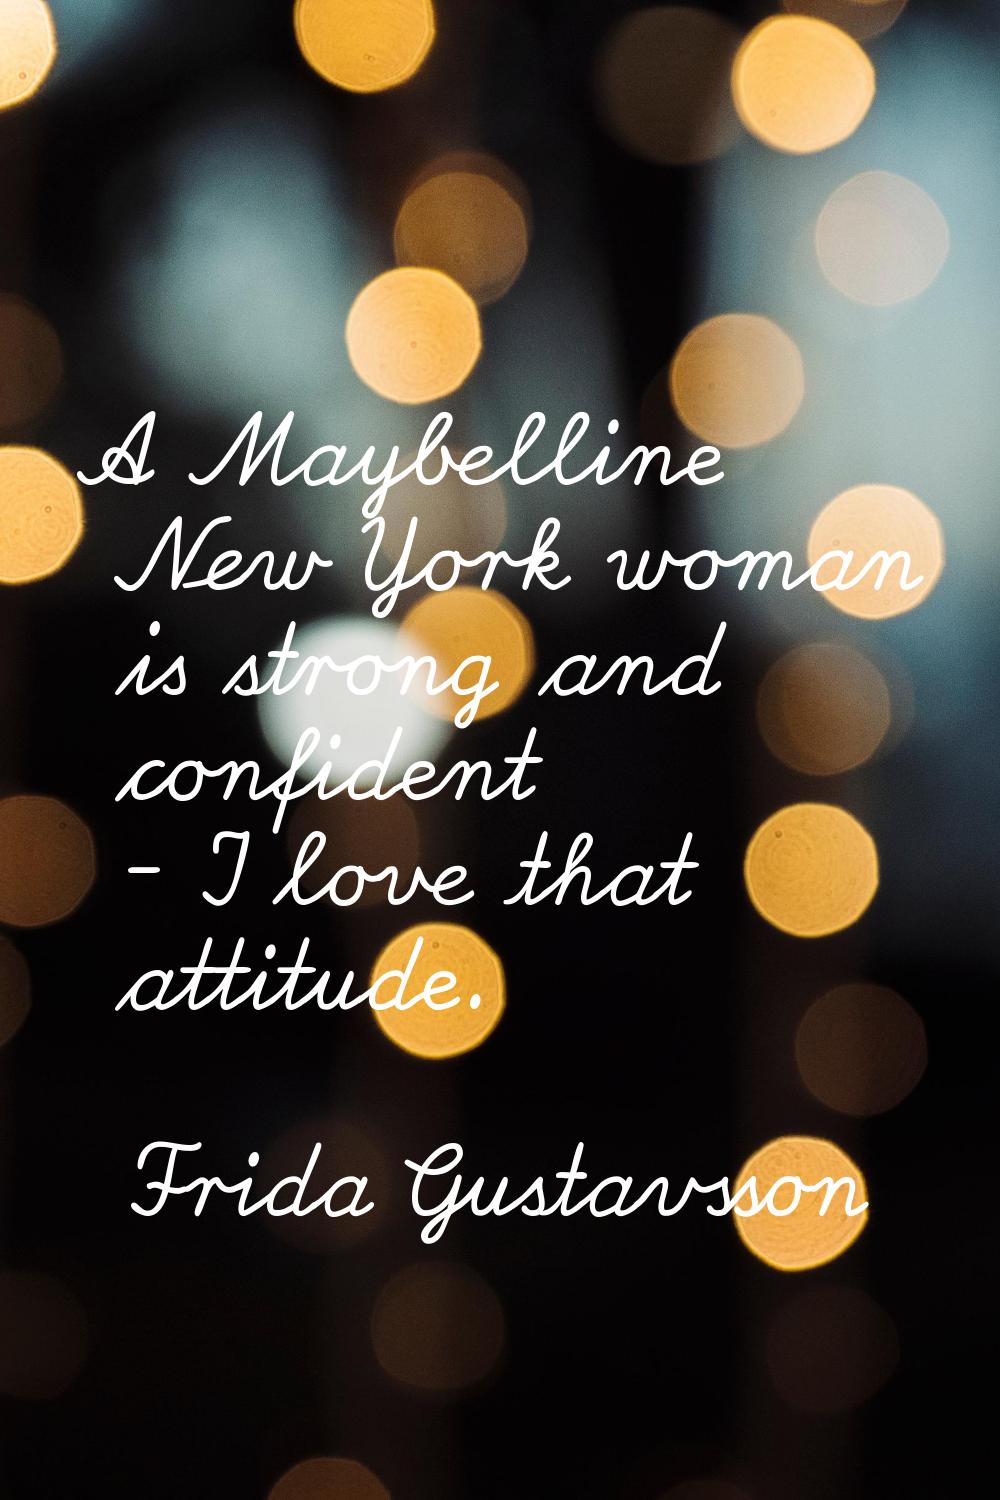 A Maybelline New York woman is strong and confident - I love that attitude.